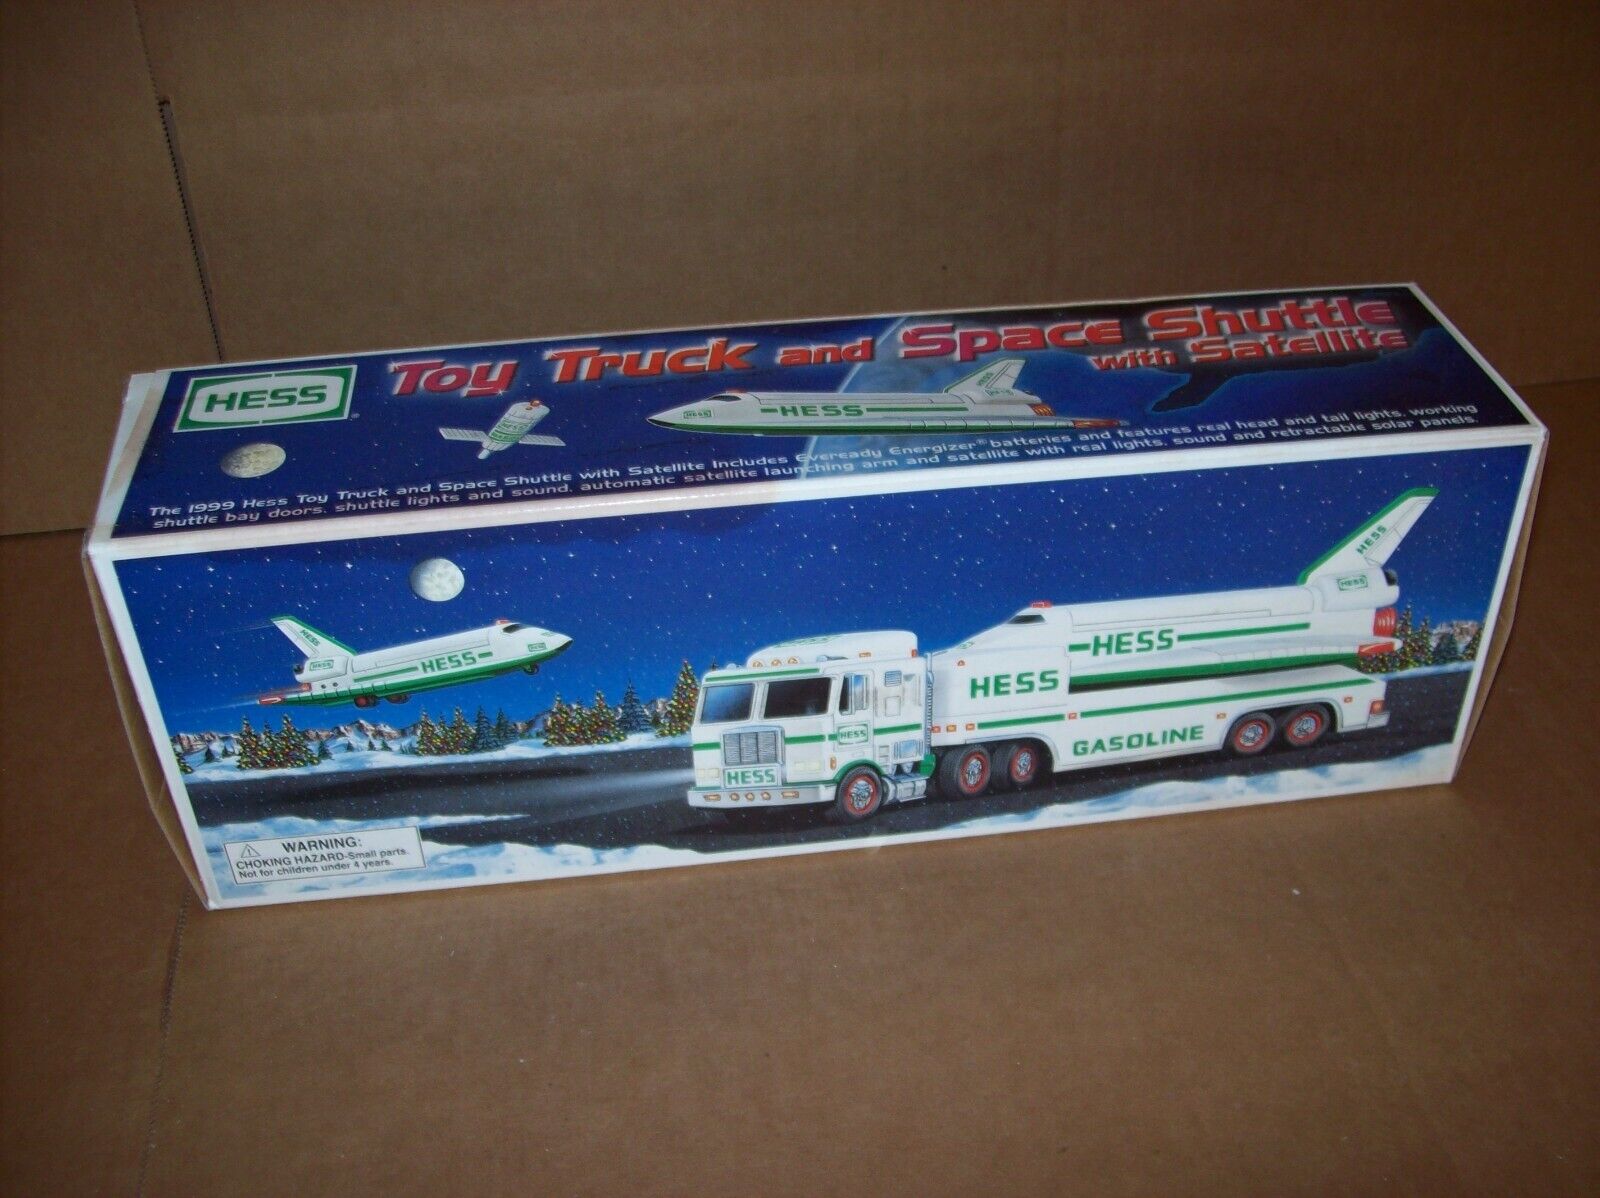 Vintage 1999 Hess Toy Truck & Space Shuttle with Satellite NEW open box